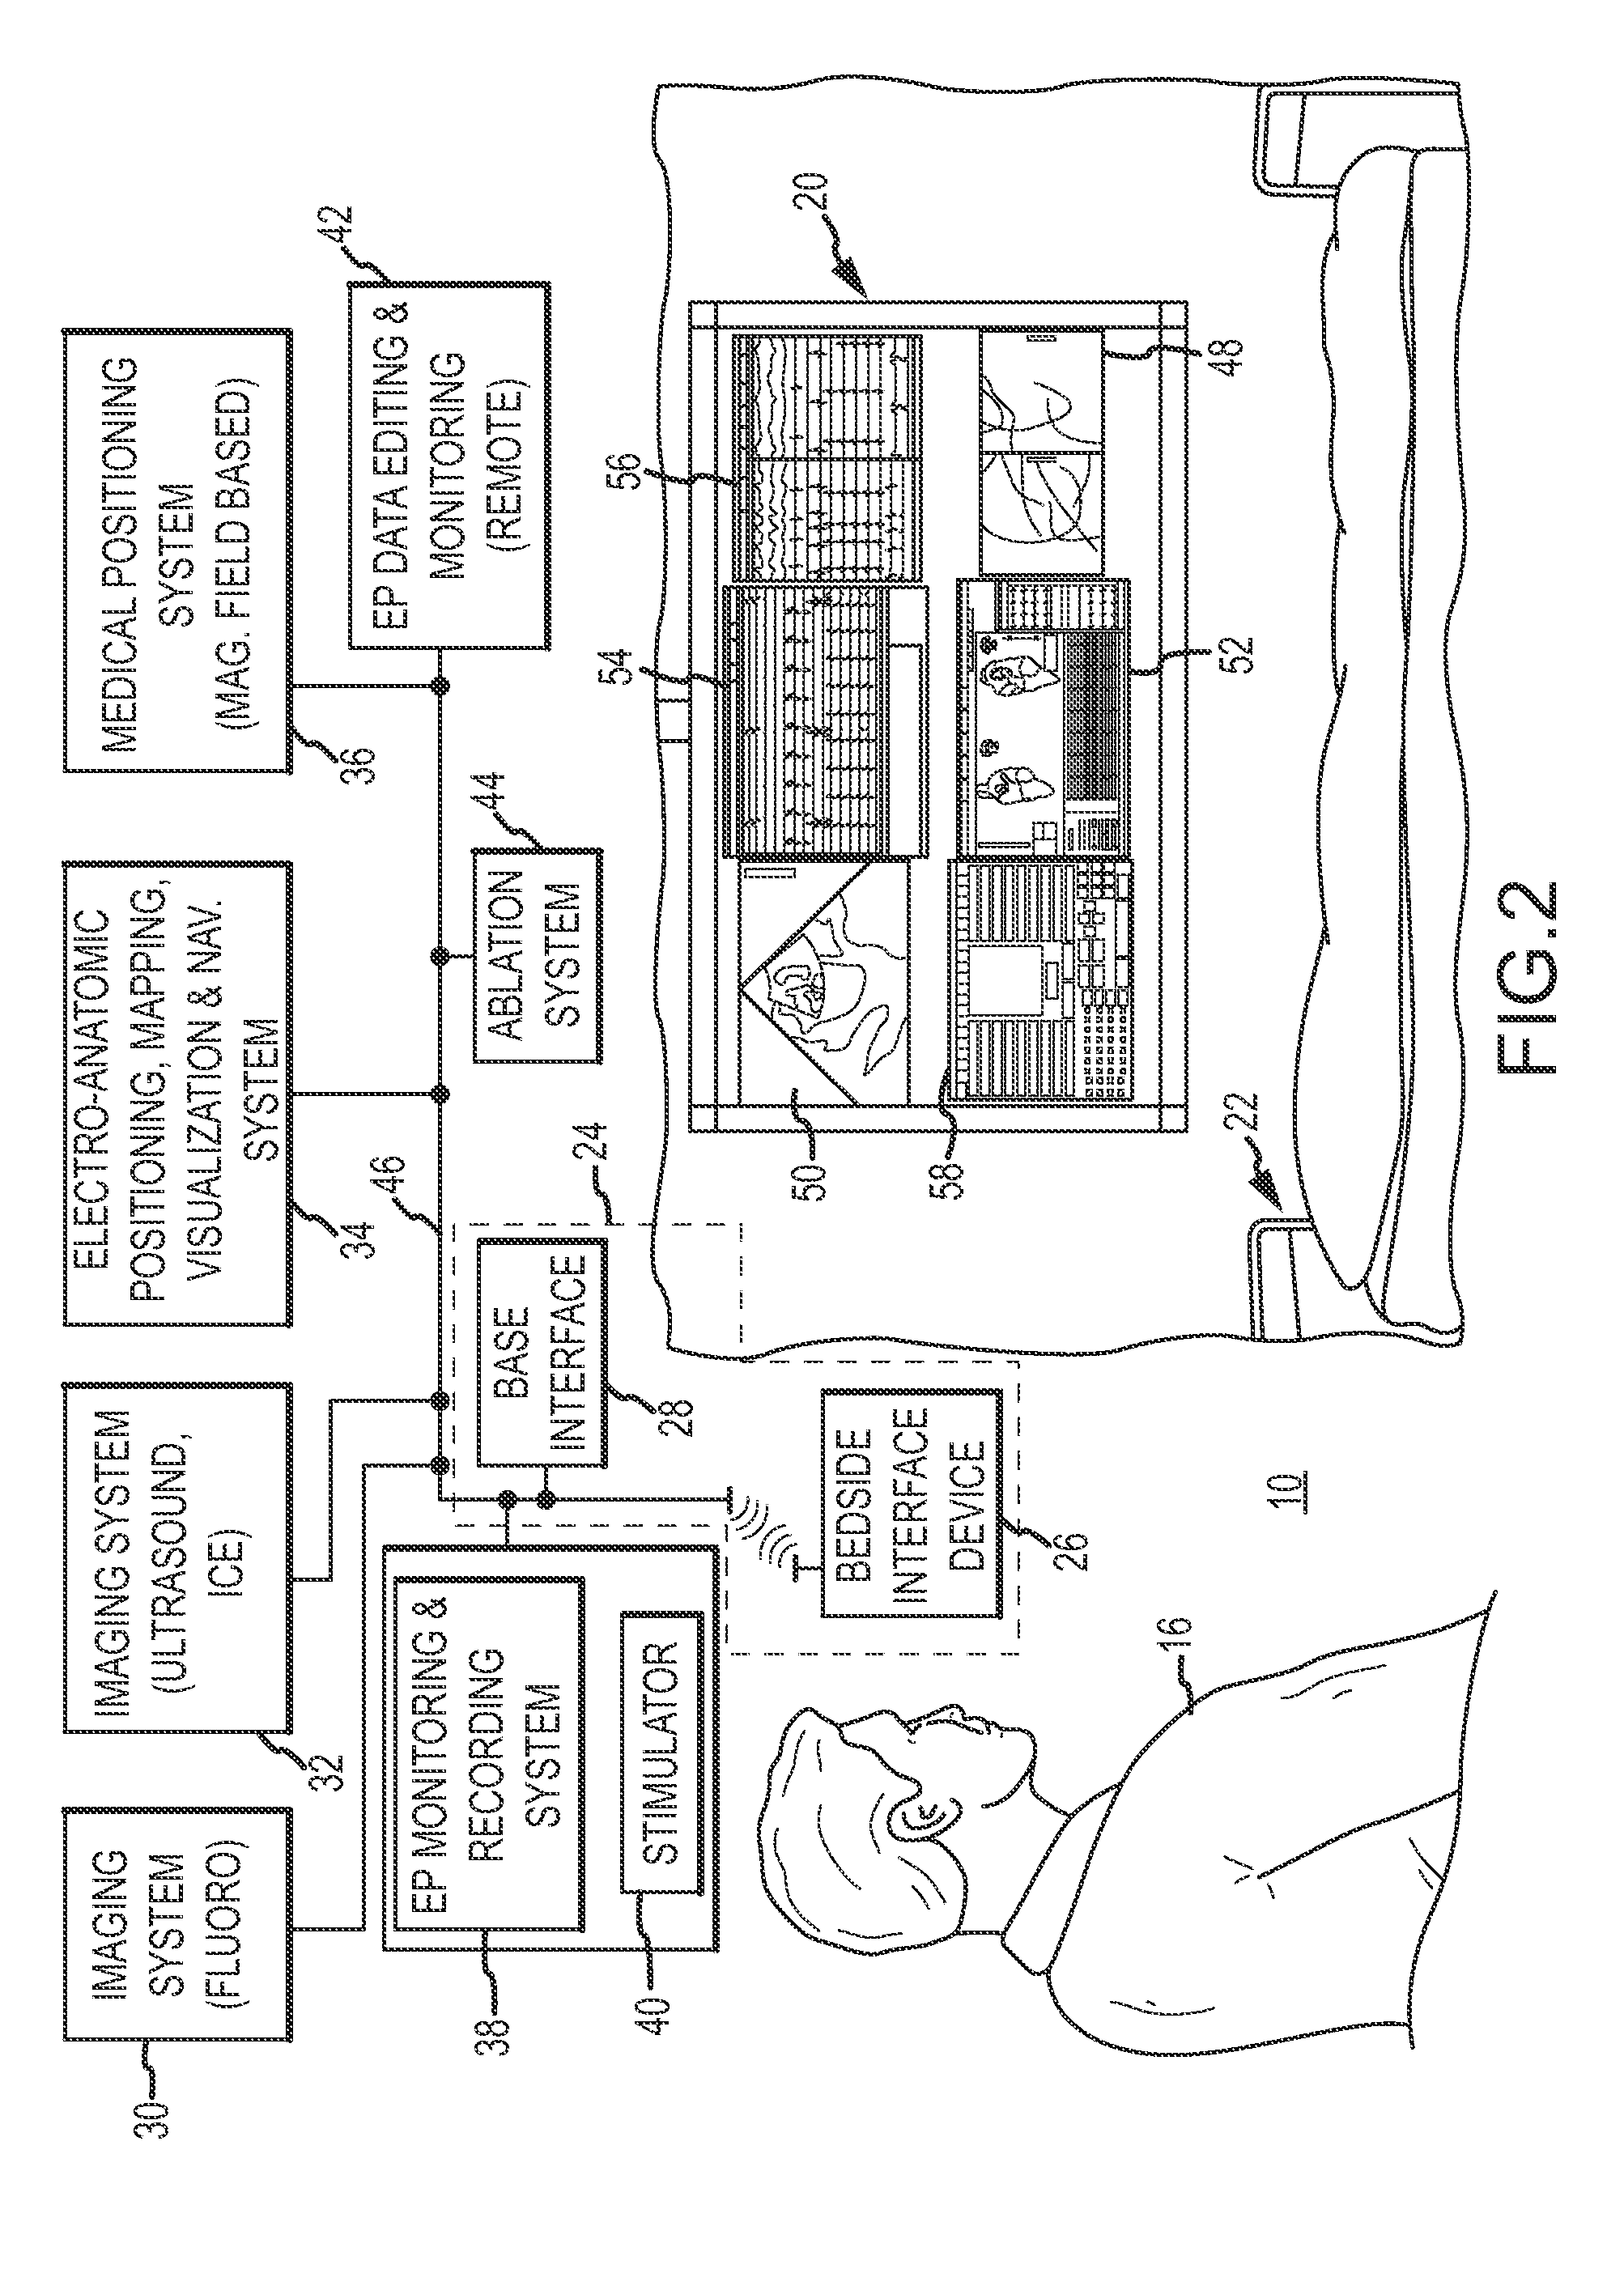 System and method for controlling a remote medical device guidance system in three-dimensions using gestures